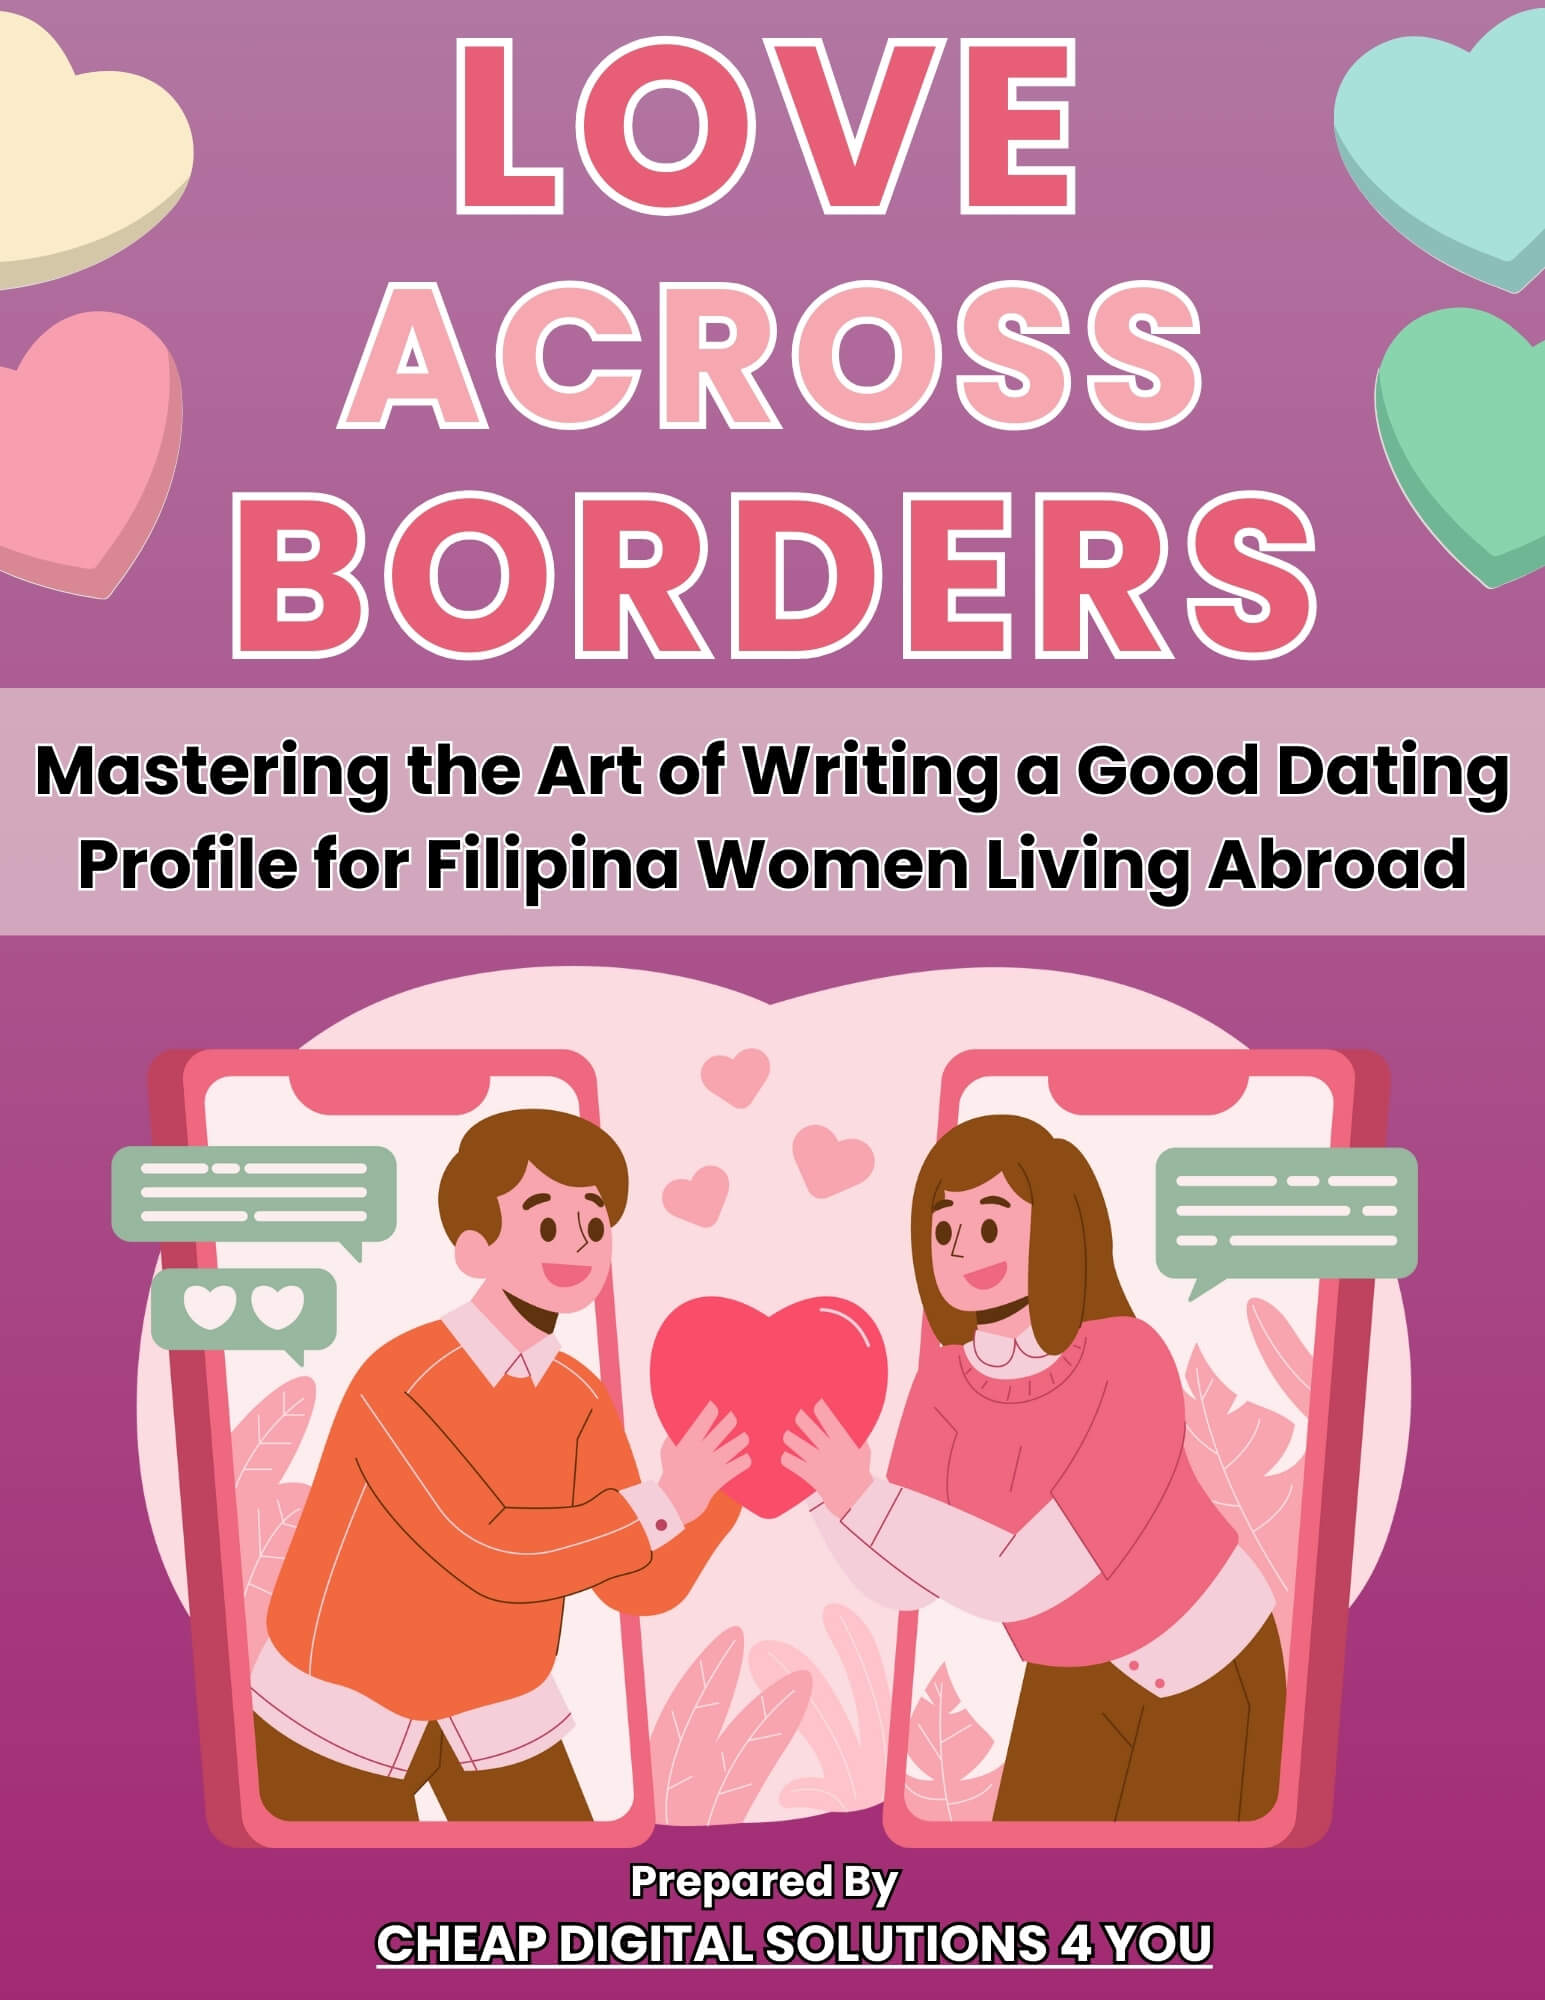 Love Across Borders - Mastering the Art of Writing a Good Dating Profile for Filipina Women Living Abroad